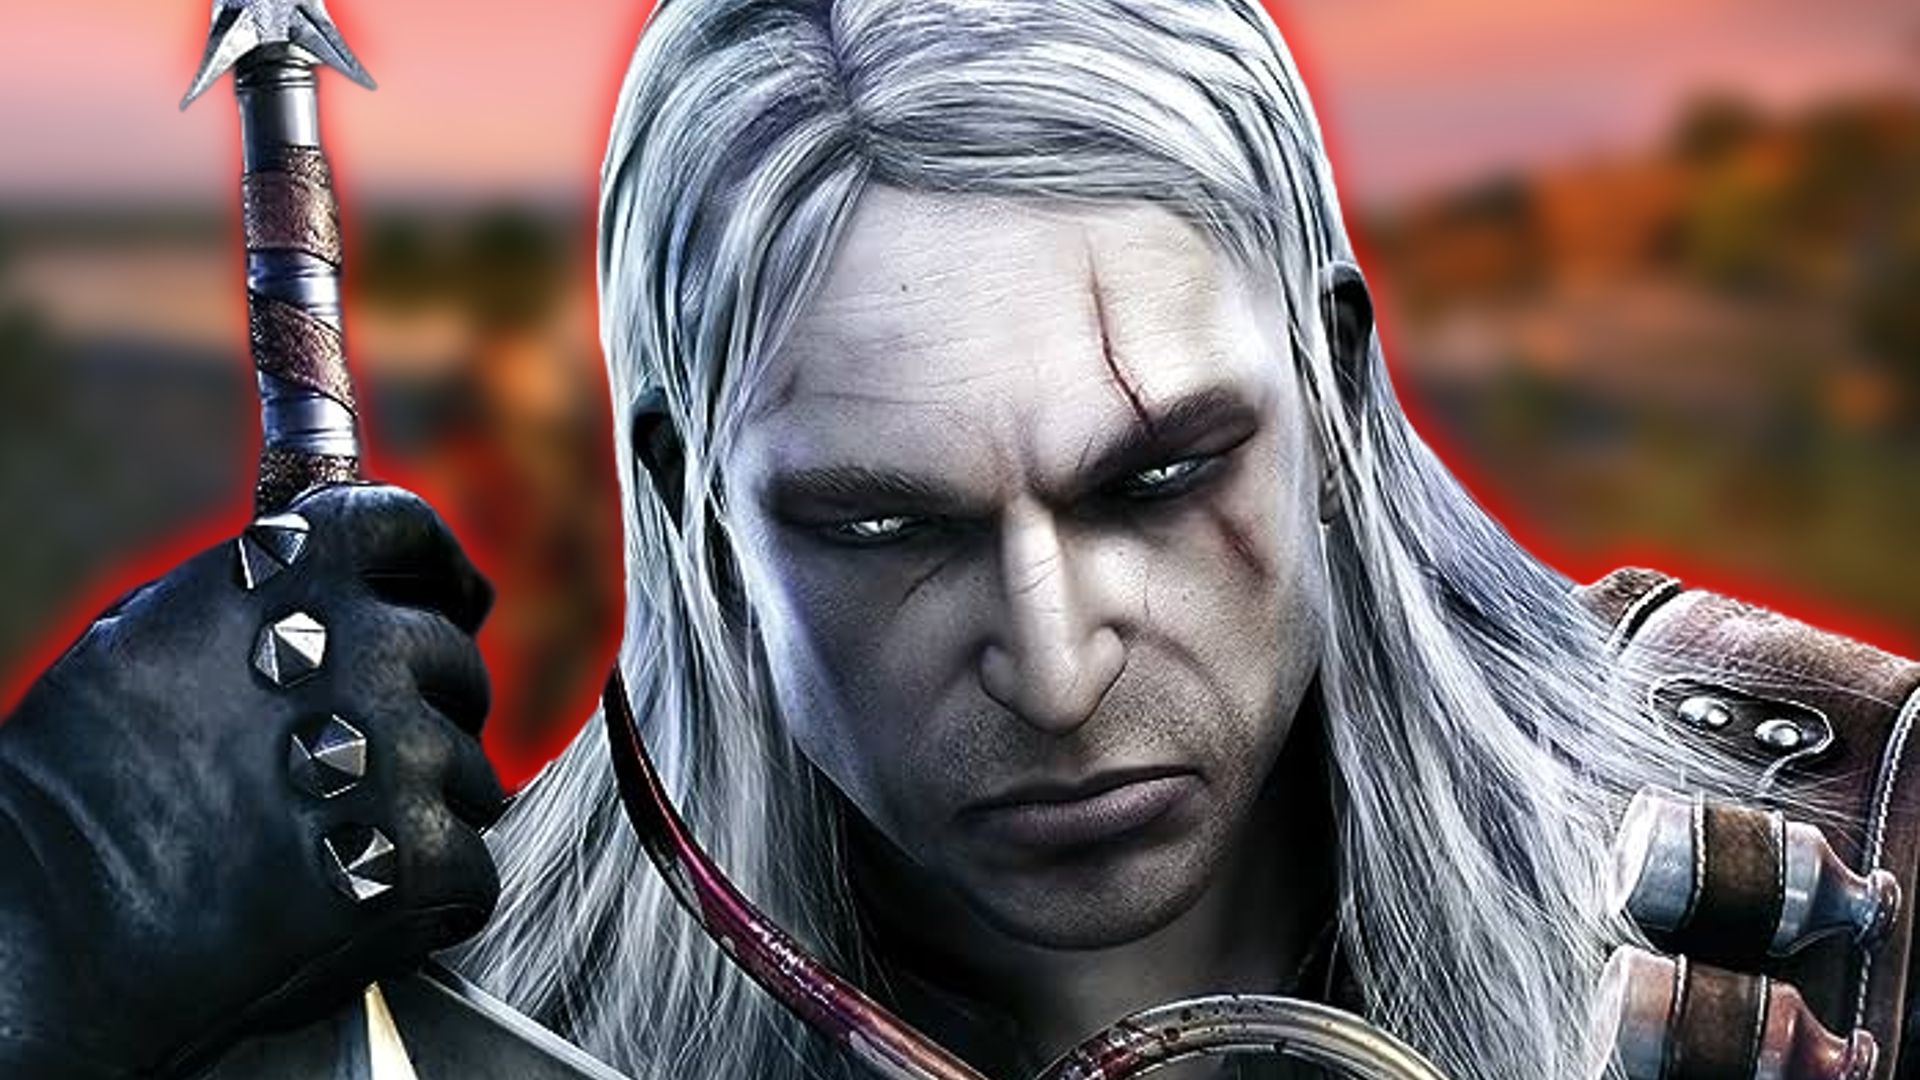 The Witcher Remake Announced, Rebuilt in Unreal Engine 5